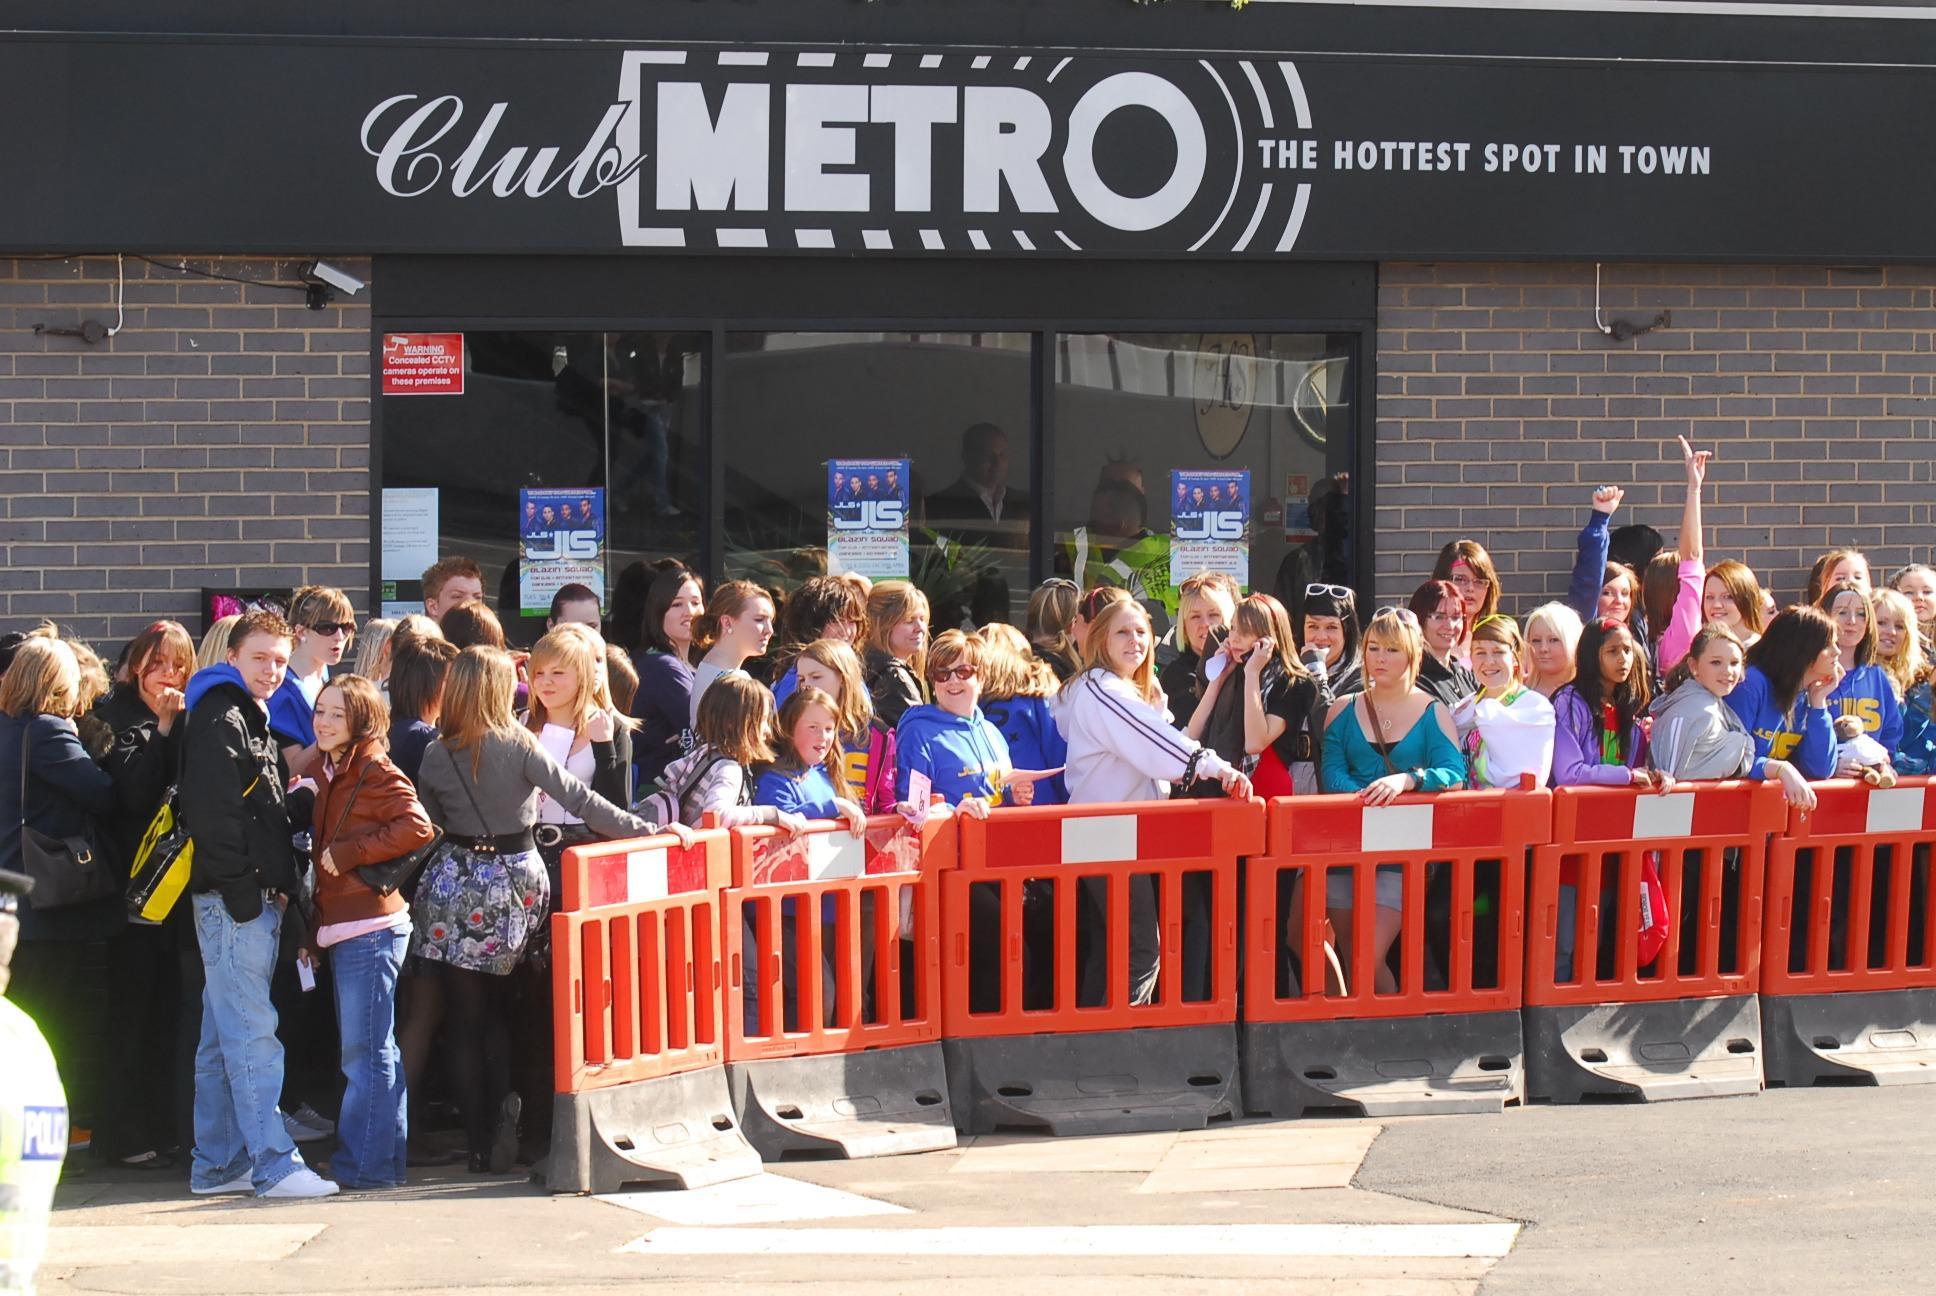 JLS under 18s gig at Club Metro, Peterborough. Queues form outside the club at the 4pm gig.